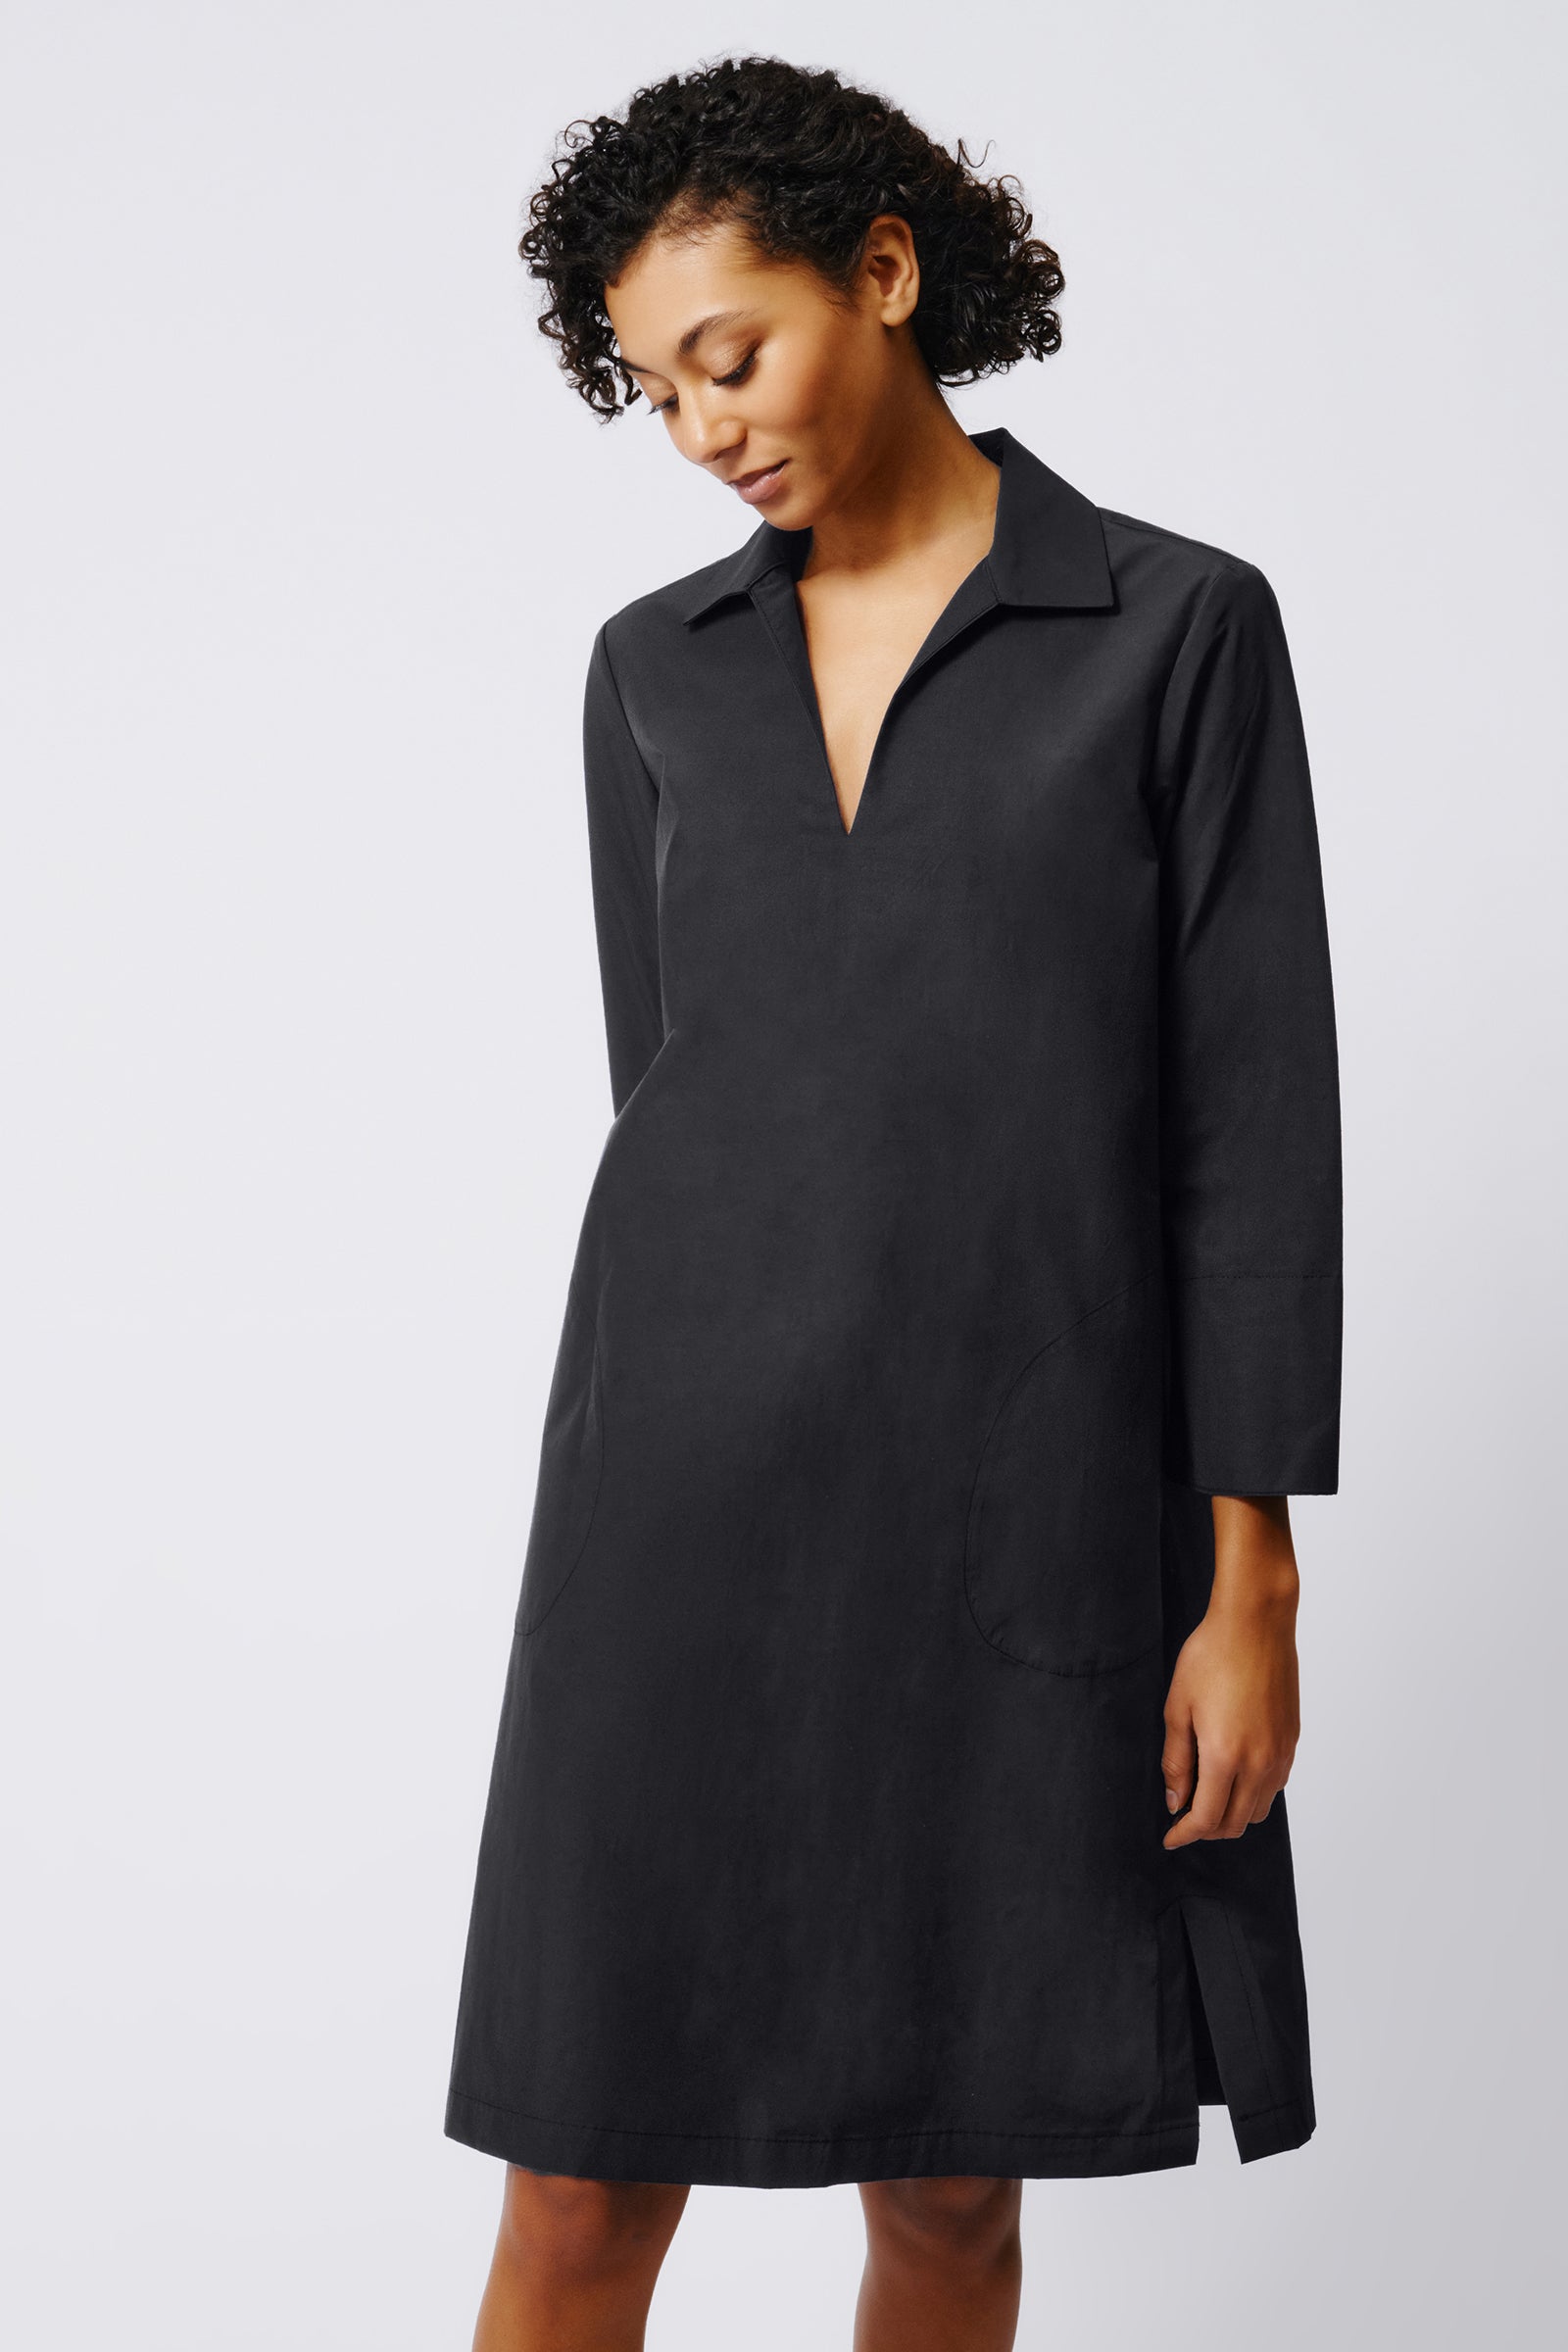 Kal Rieman Collared V Neck Dress in Black Broadcloth on Model Front View Crop 2